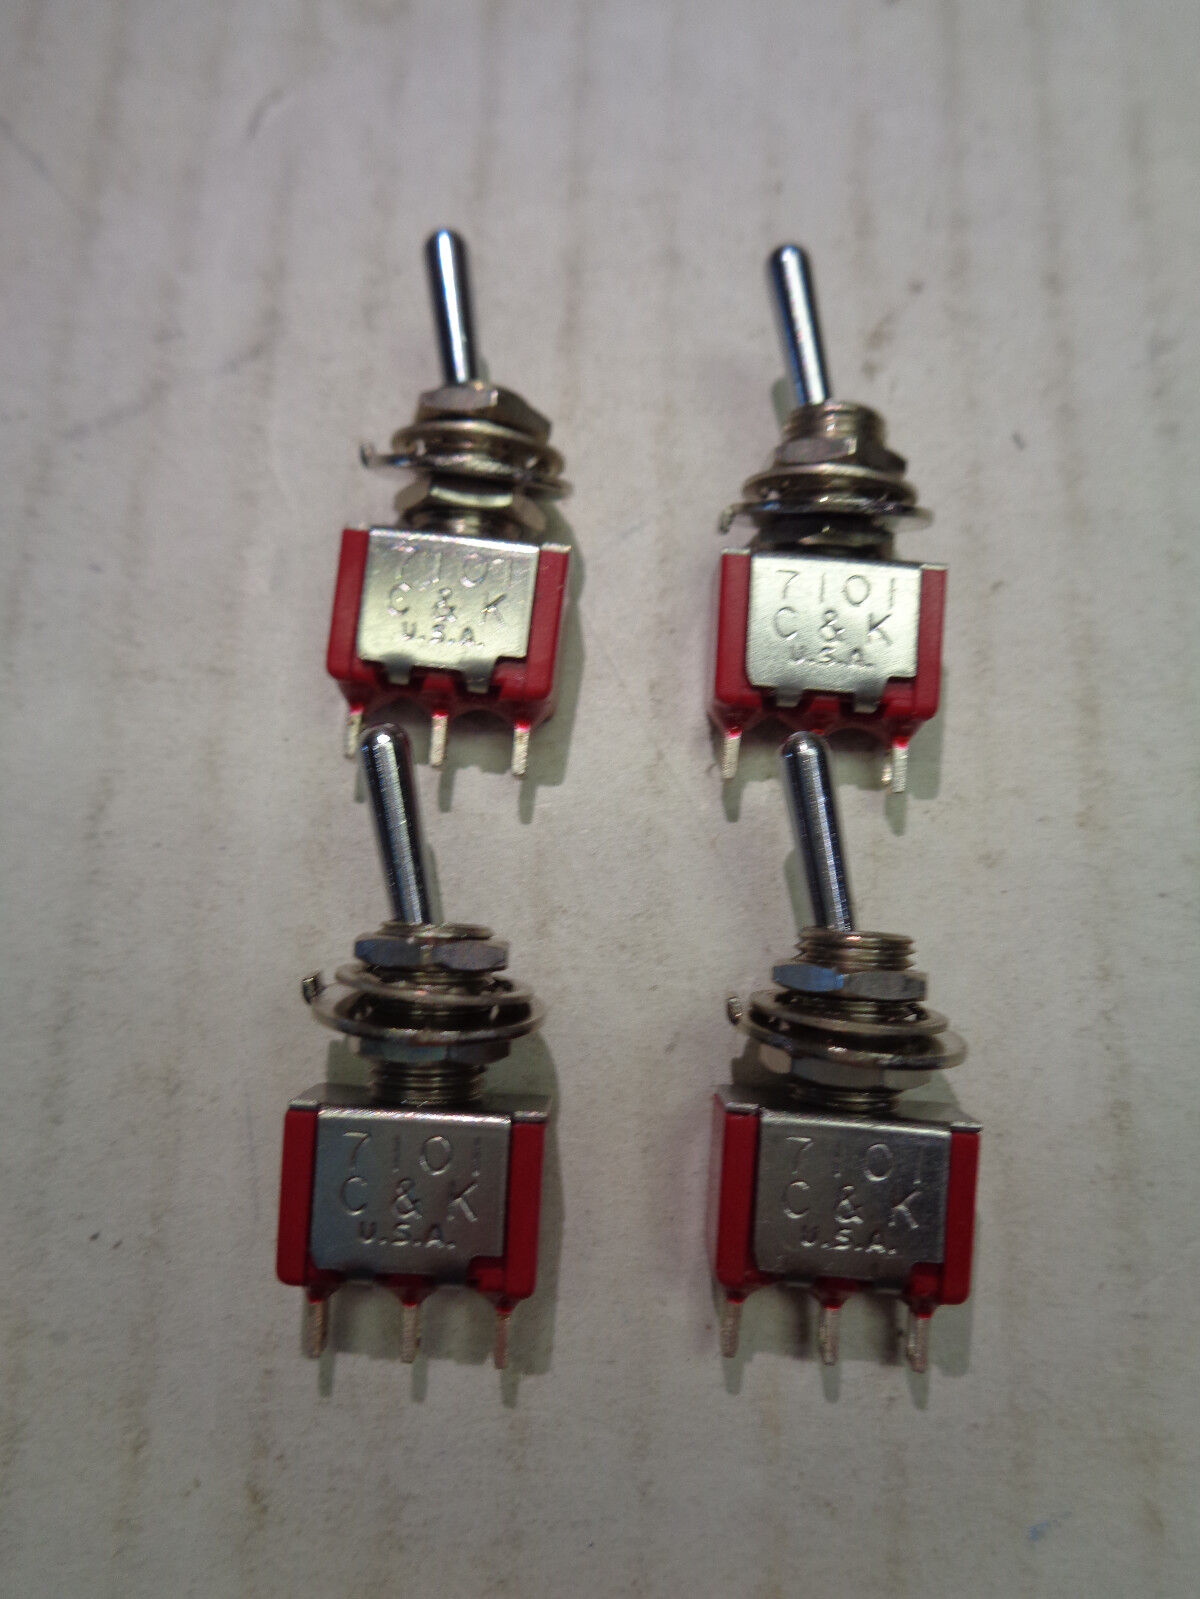 C&K TOGGLE SWITCH 7101 Lot Of 4 Each NEW  Buy More Save L@@K